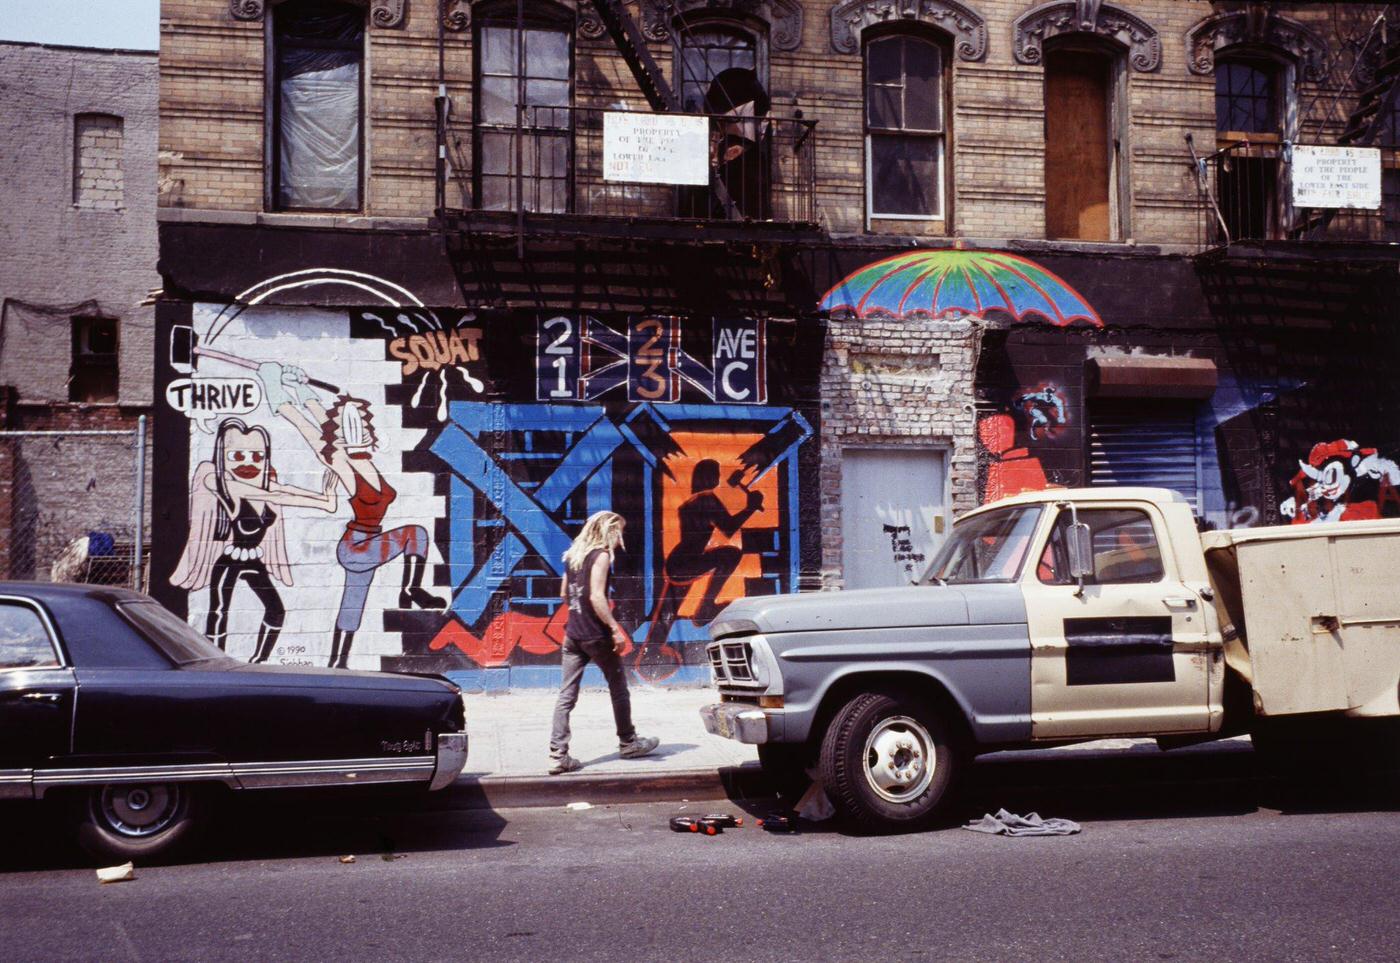 Sidewalk Mural On A Bricked-Over Building At 21 And 23 Avenue C, Lower East Side, Manhattan, 1990